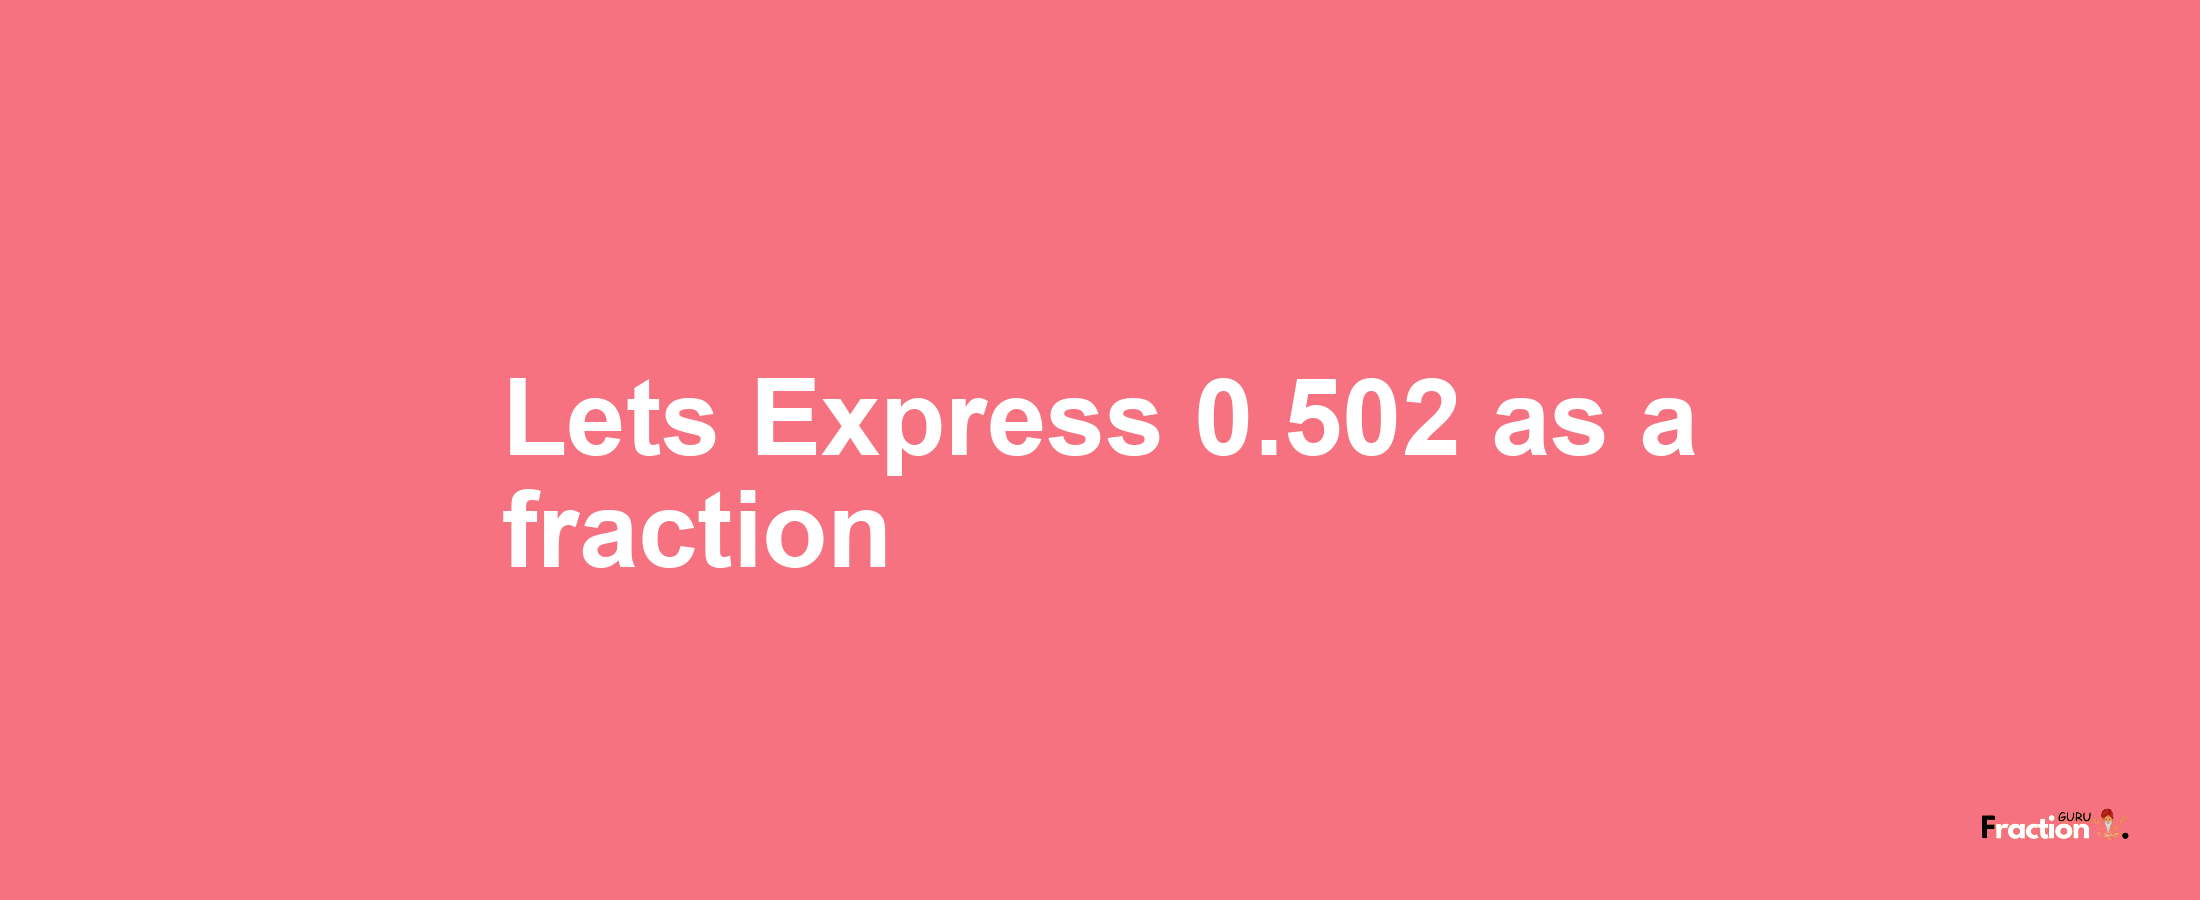 Lets Express 0.502 as afraction